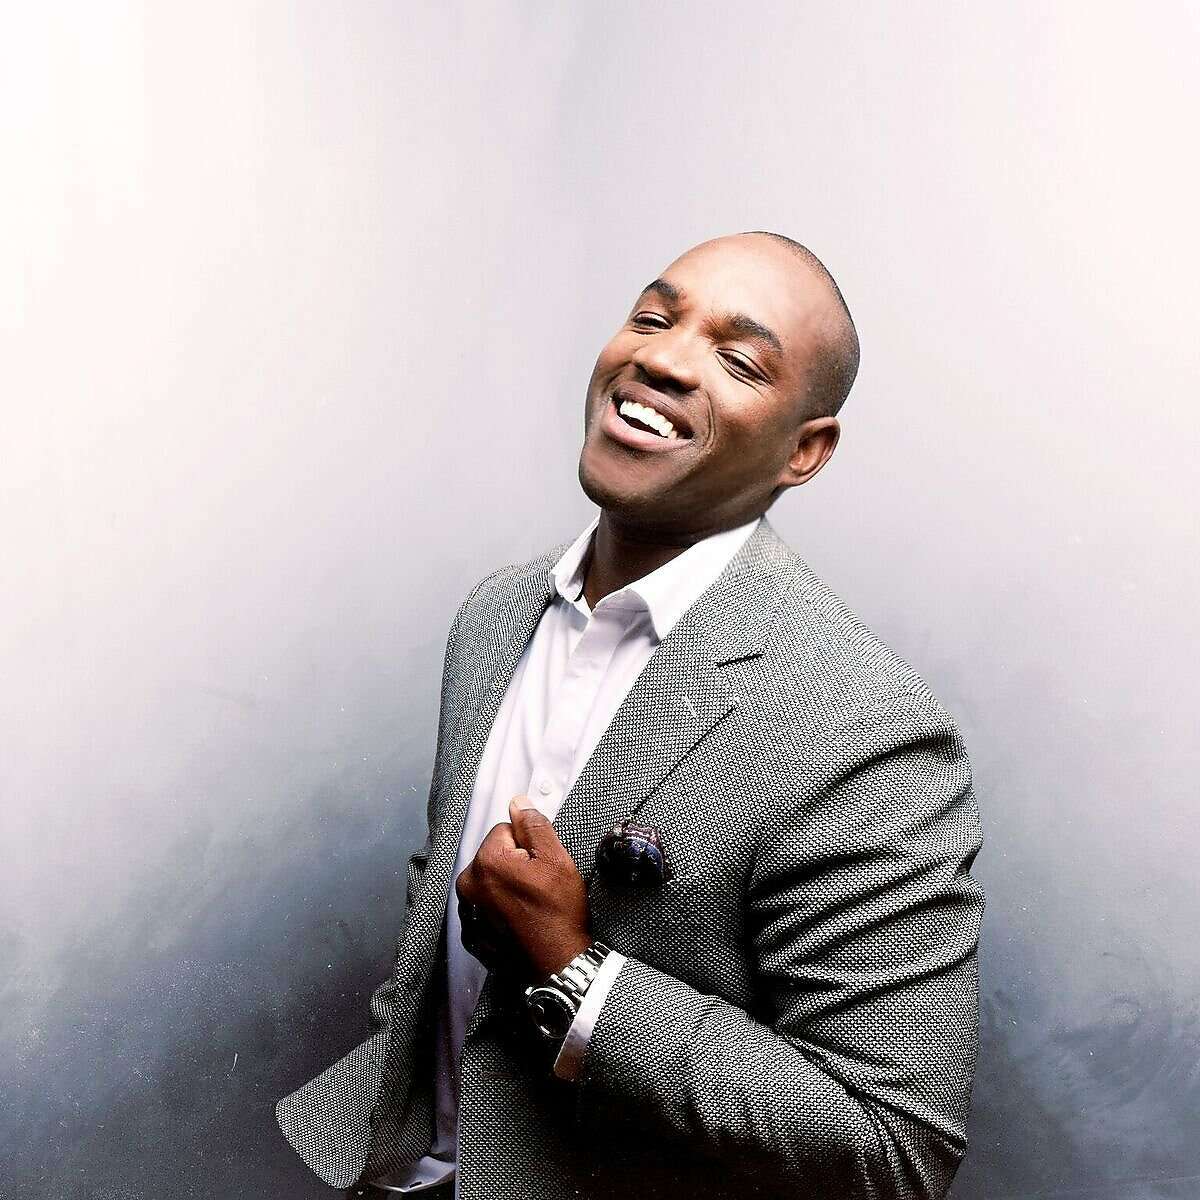 Operatic tenor Lawrence Brownlee plays a concert for Cal Performances